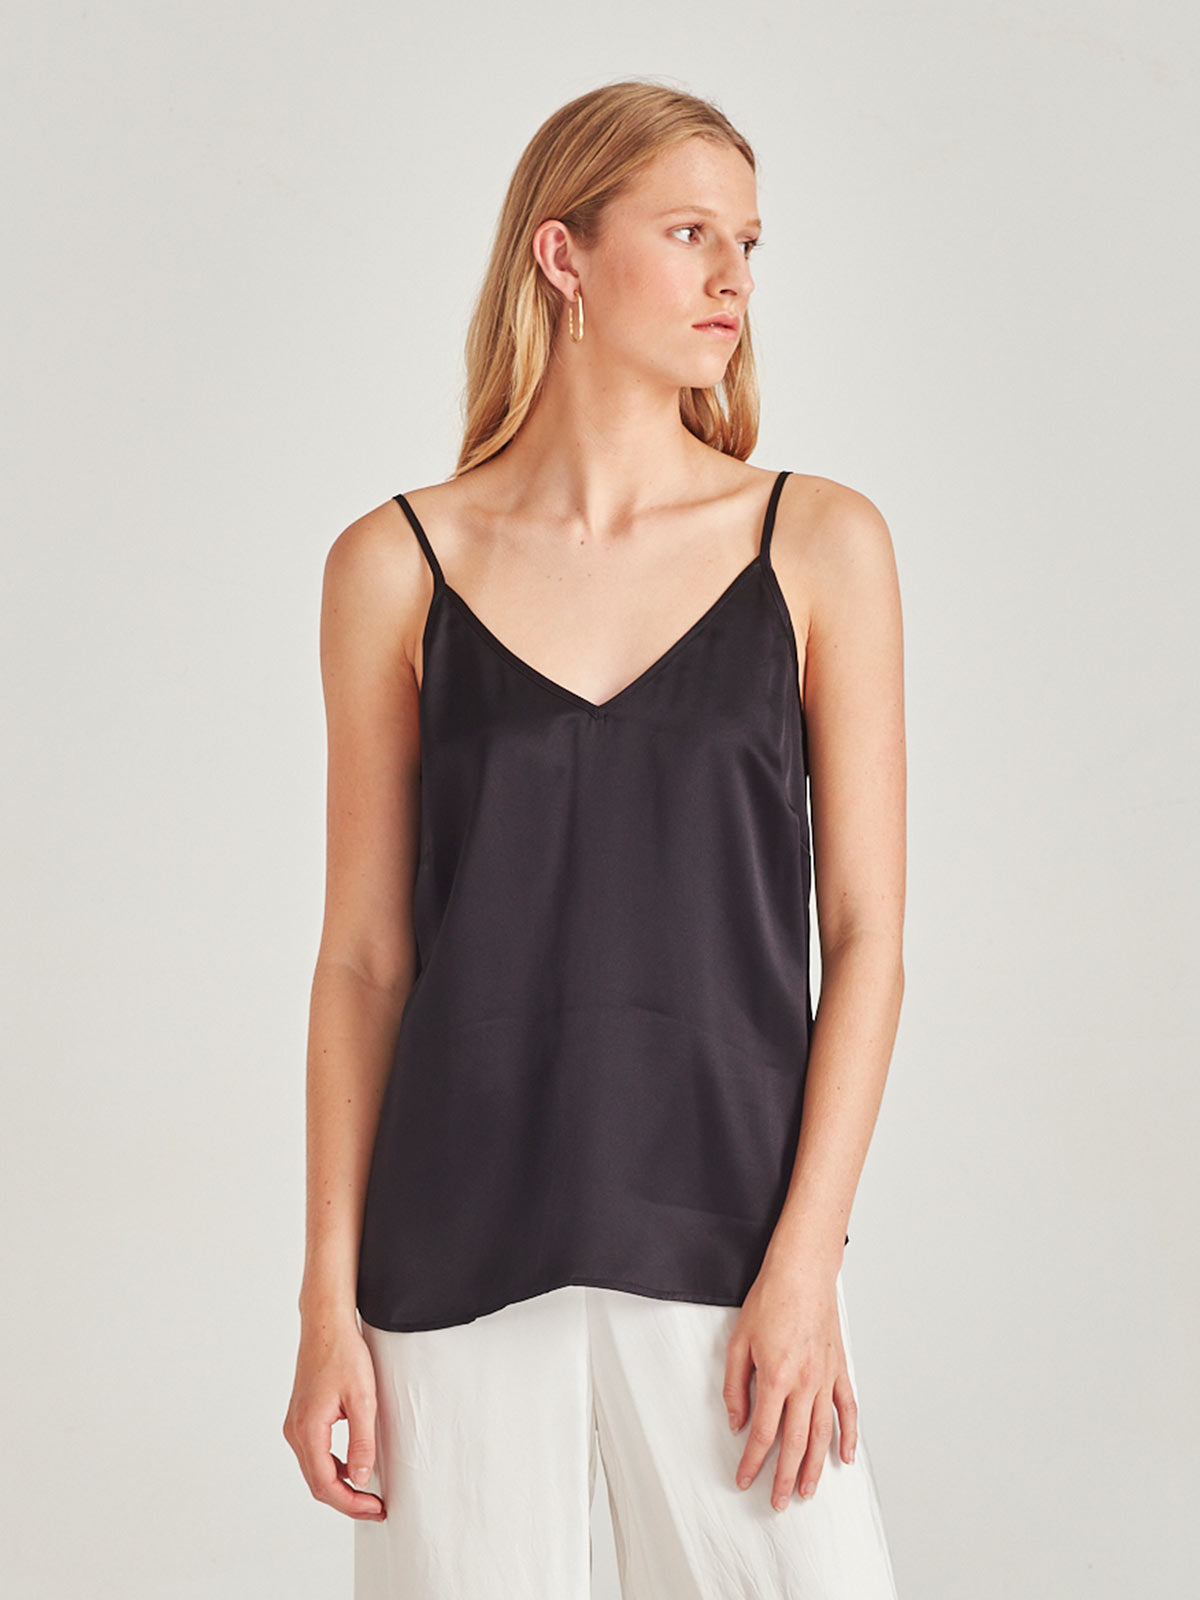 How to Style the Silk Cami